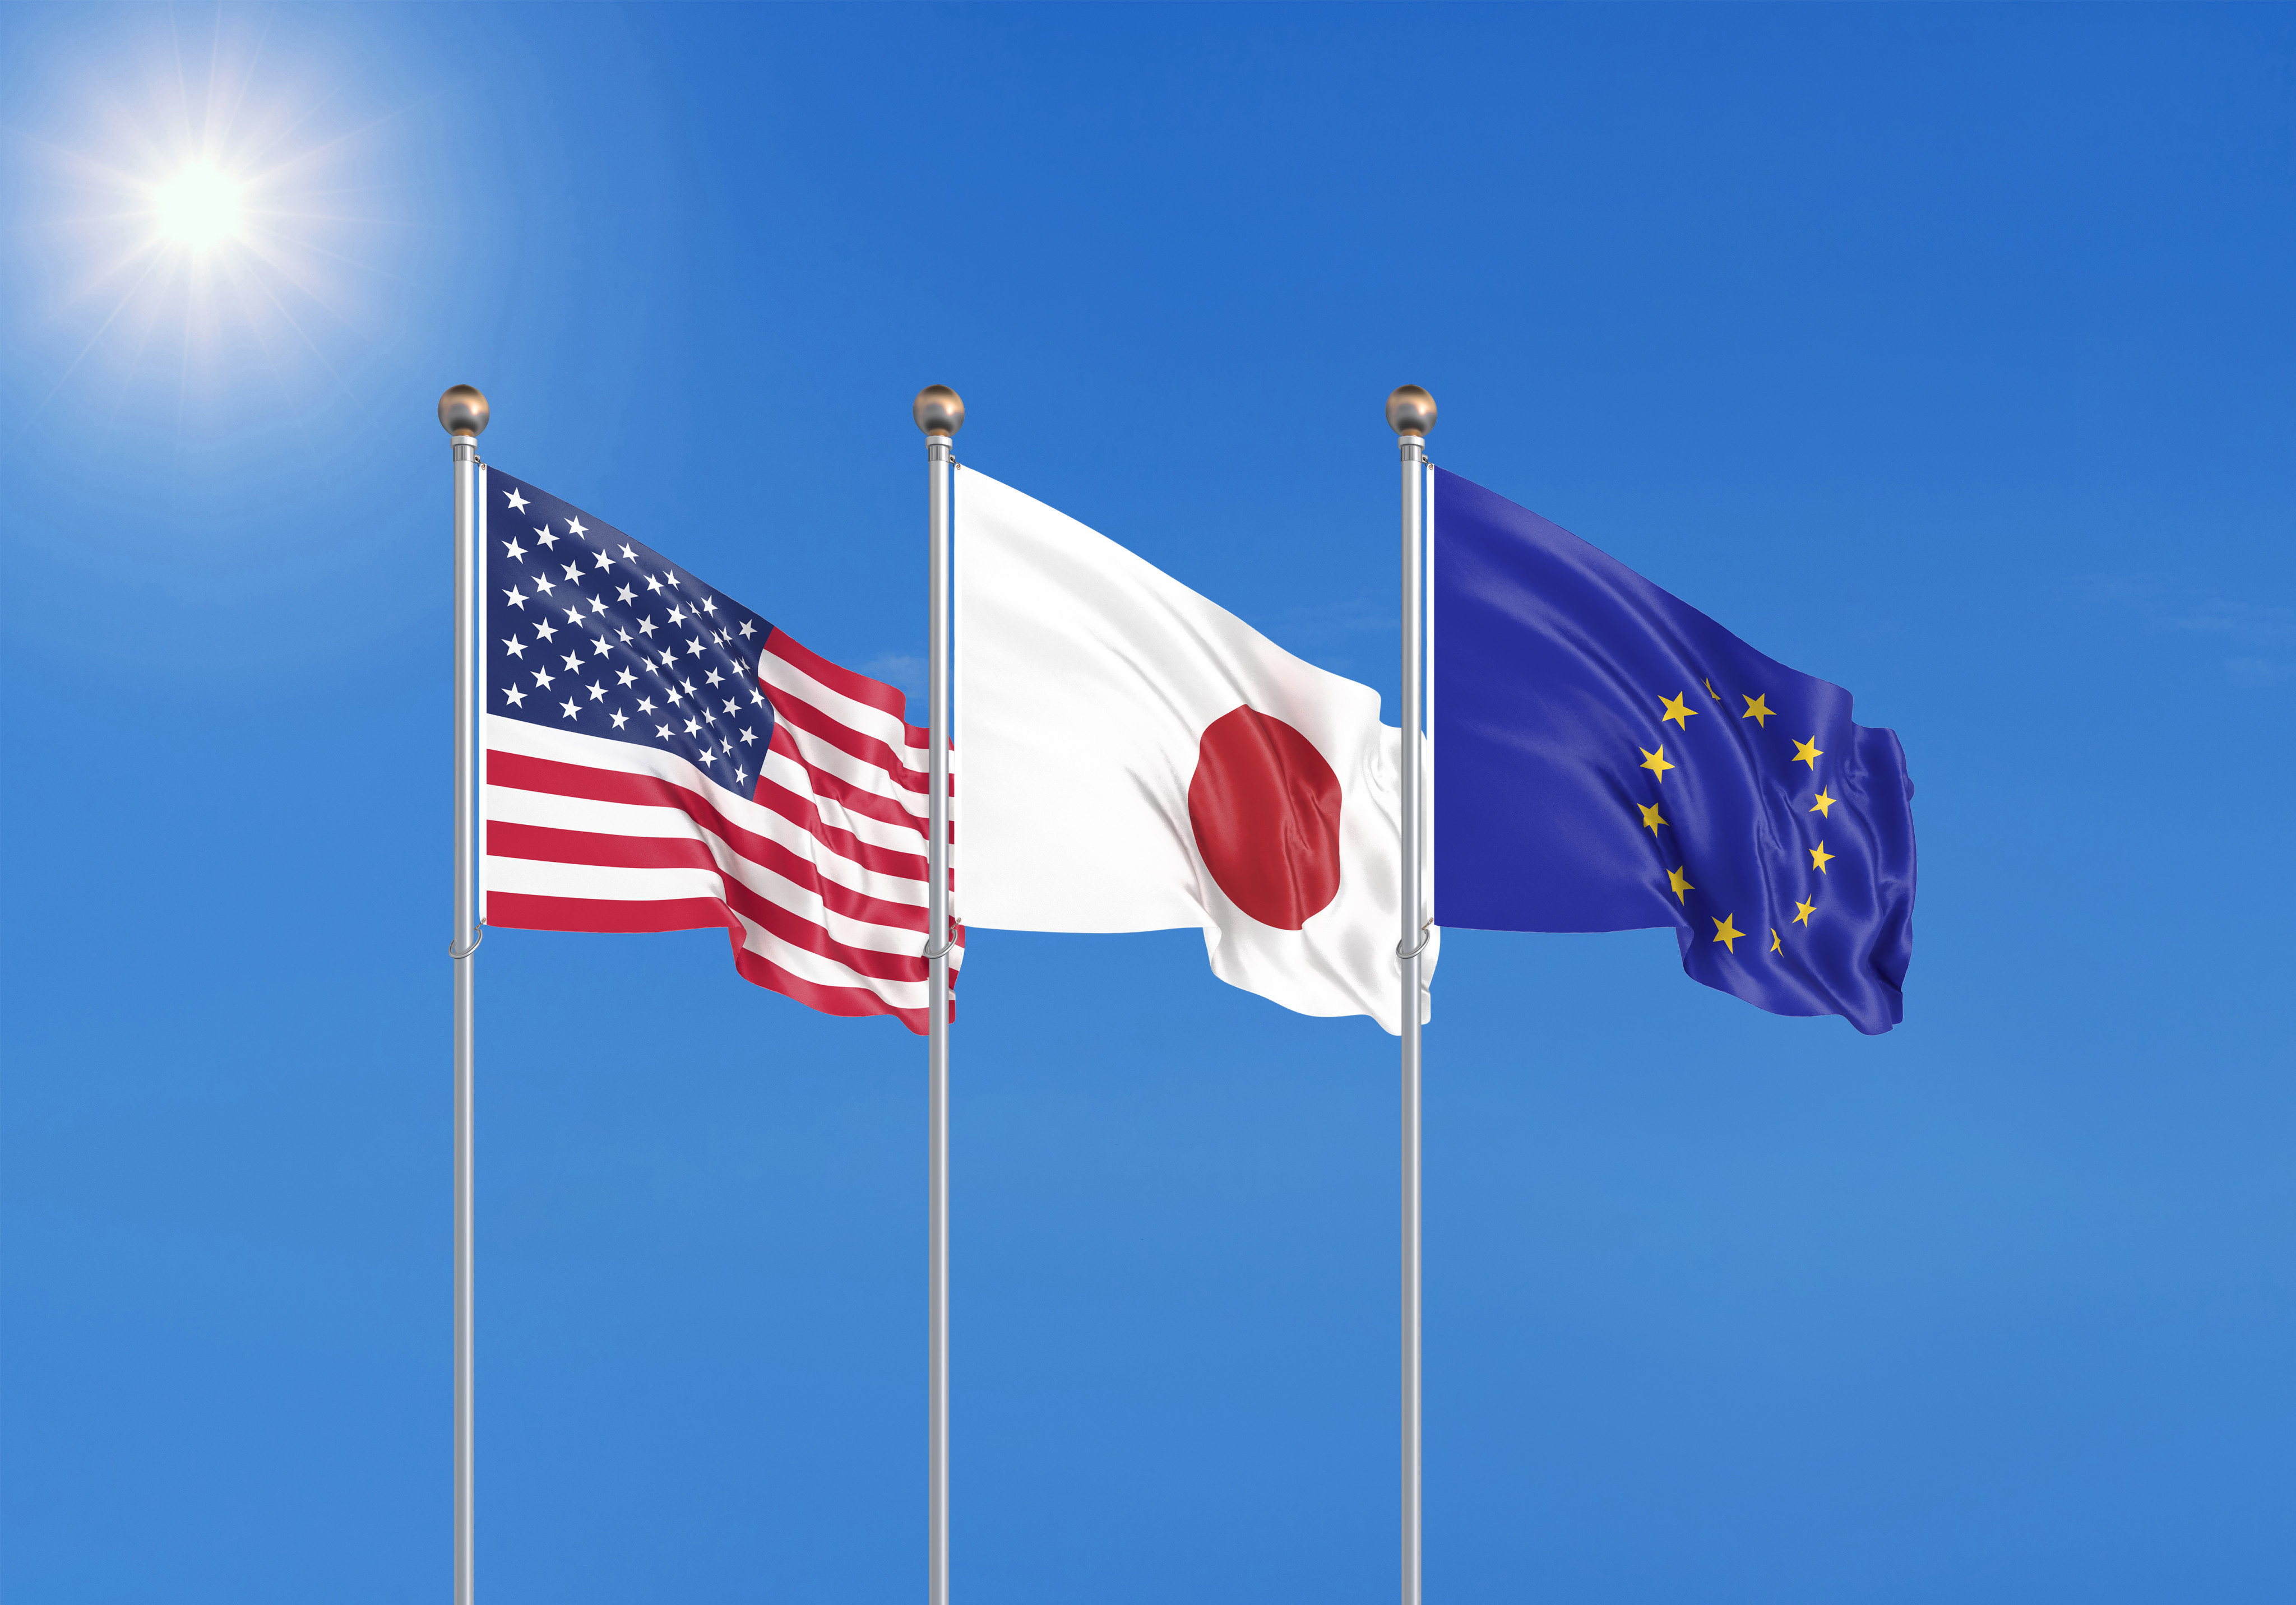 The flags of the European Union, the United States and Japan. Illustration: Shutterstock